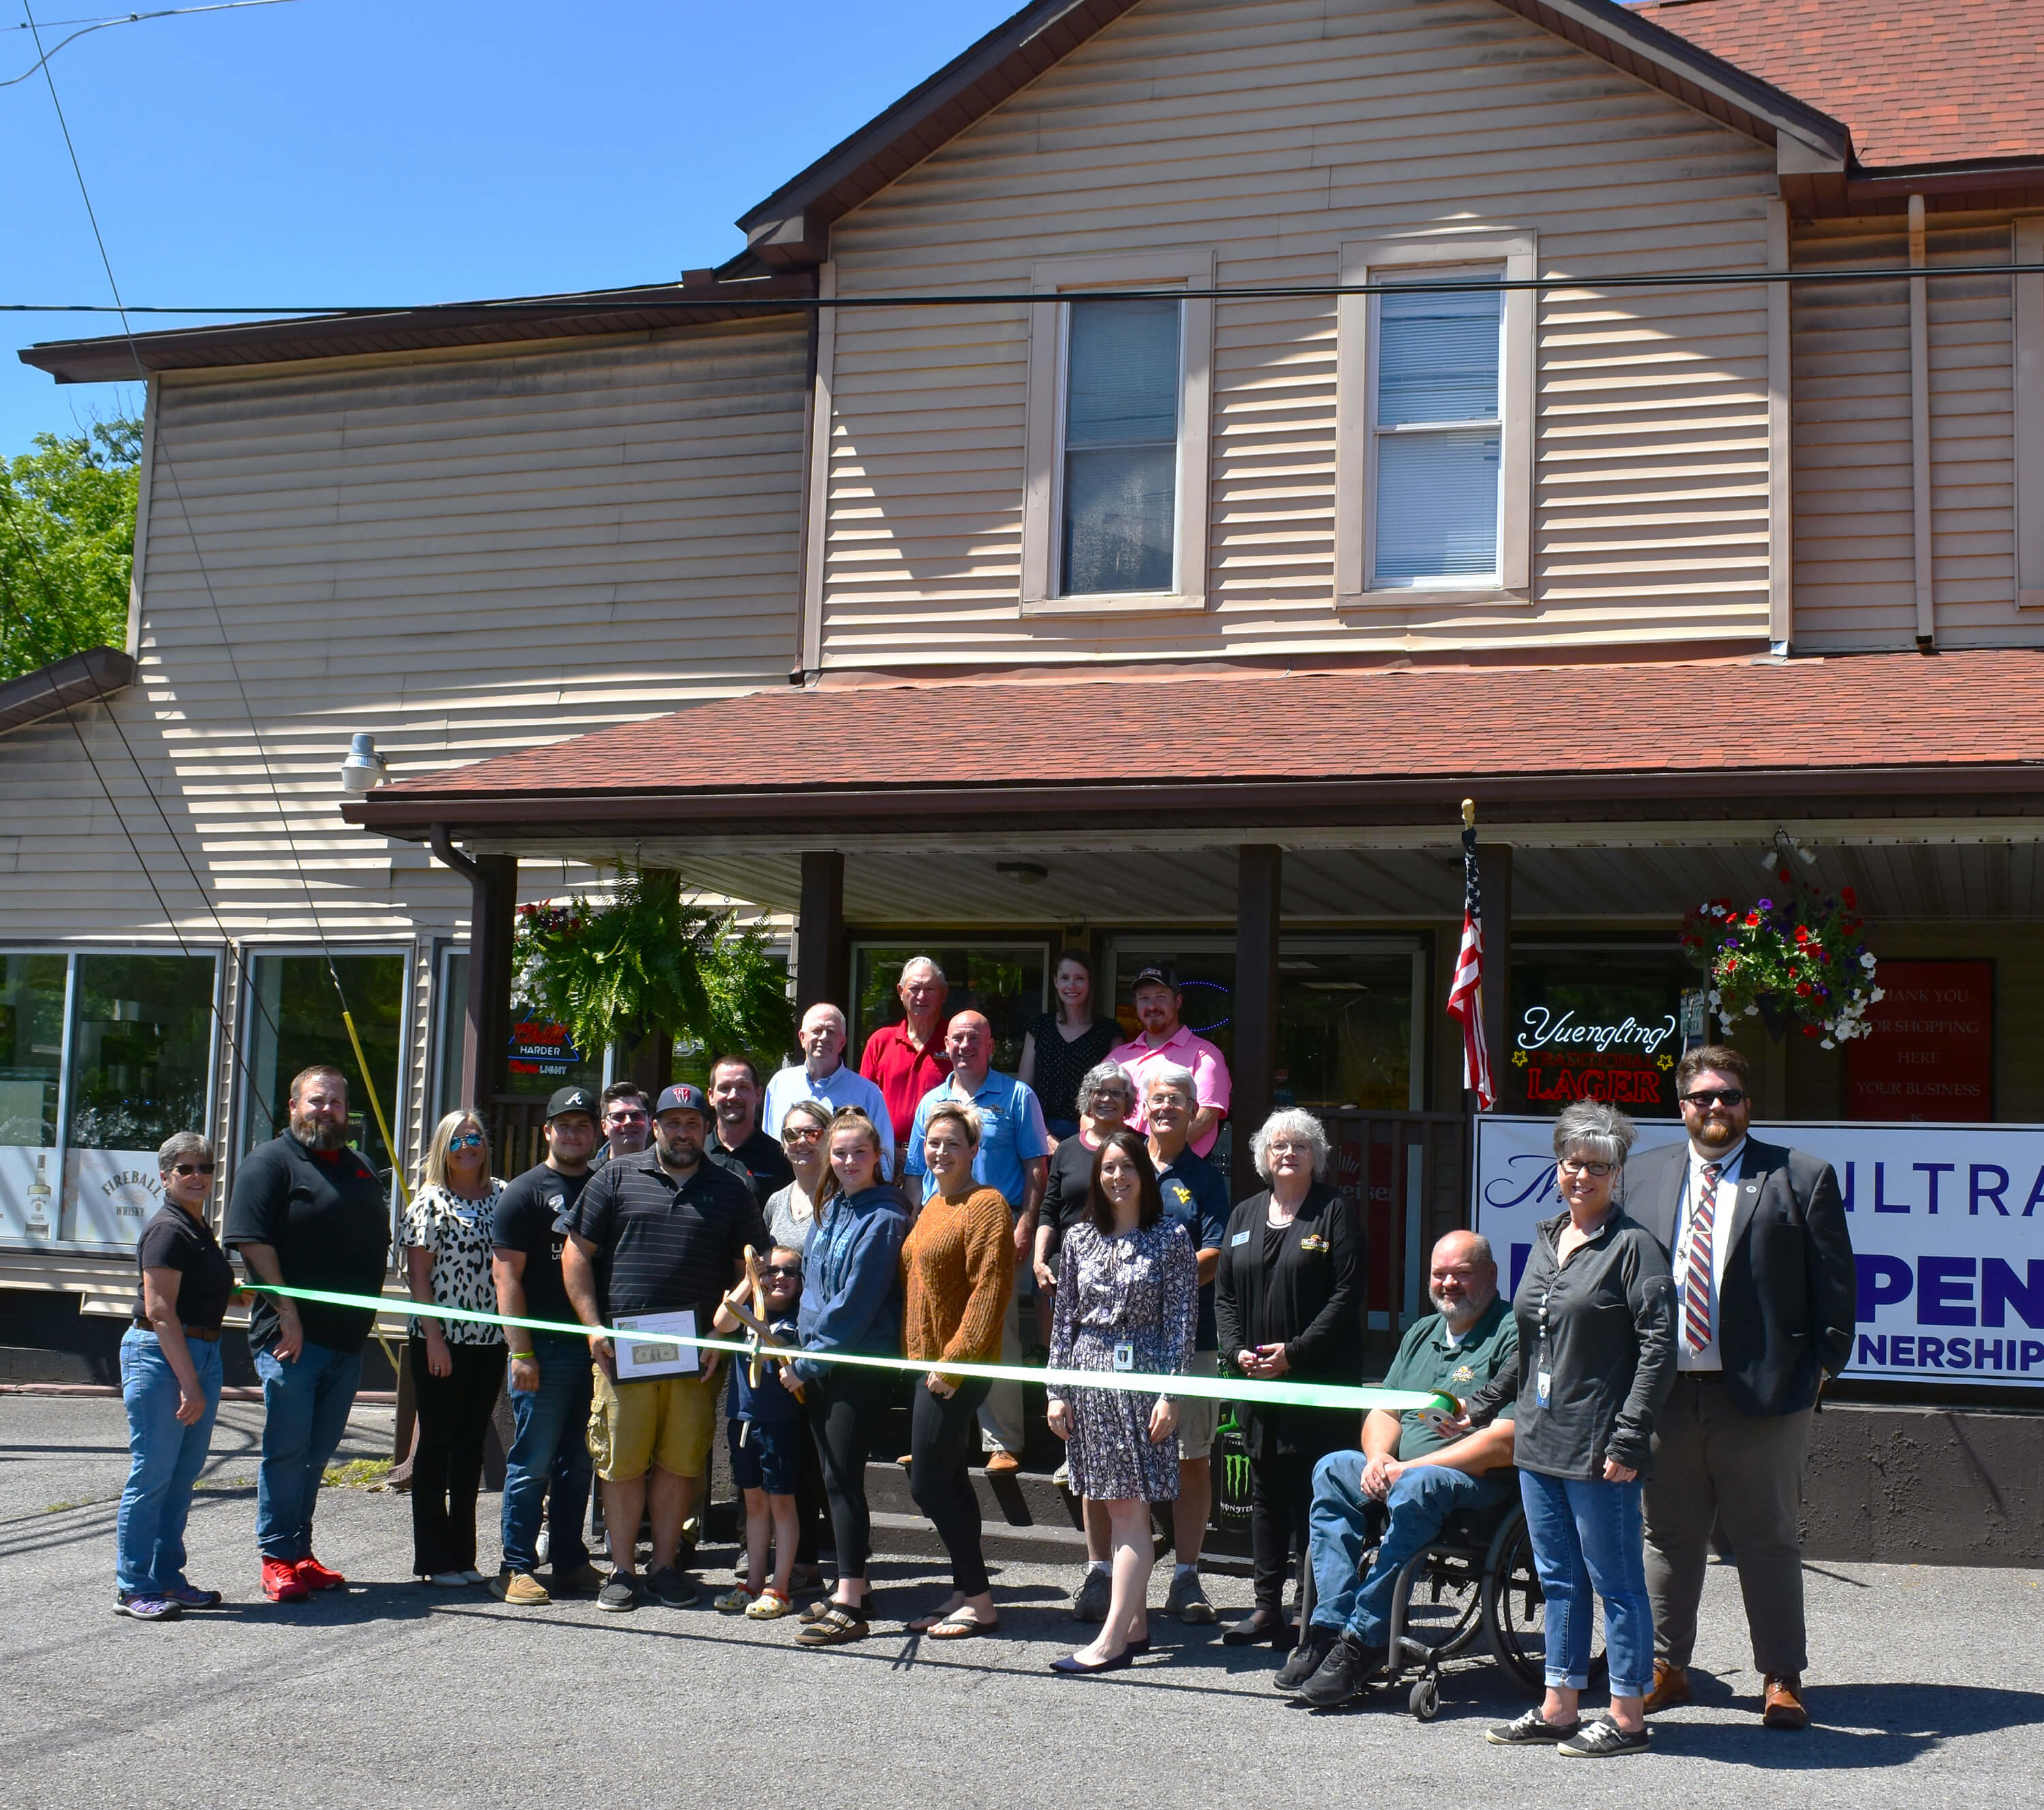 On Wednesday, June 12, the Garrett County Chamber of Commerce partnered with the Garrett County Department of Business Development to hold a ribbon cutting ceremony for the grand opening of Winner’s Circle Convenience Center under new ownership.